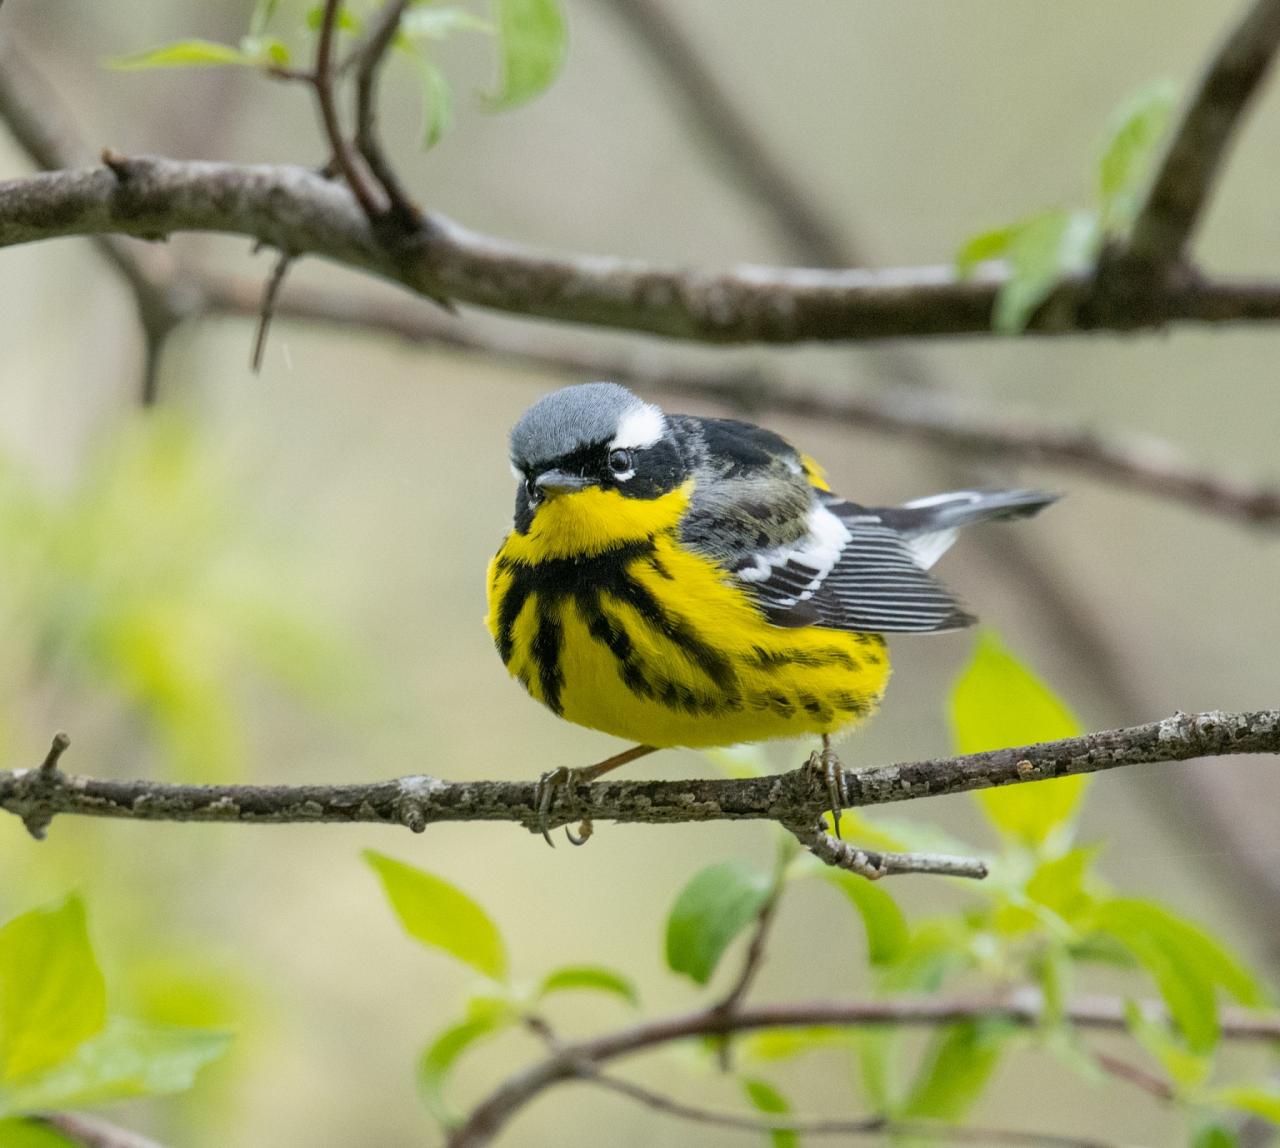 Magnolia Warbler, Cape May, Cape May Migration, Fall Migration, Fall Migration Tour, Cape May Birding Tour, Naturalist Journeys